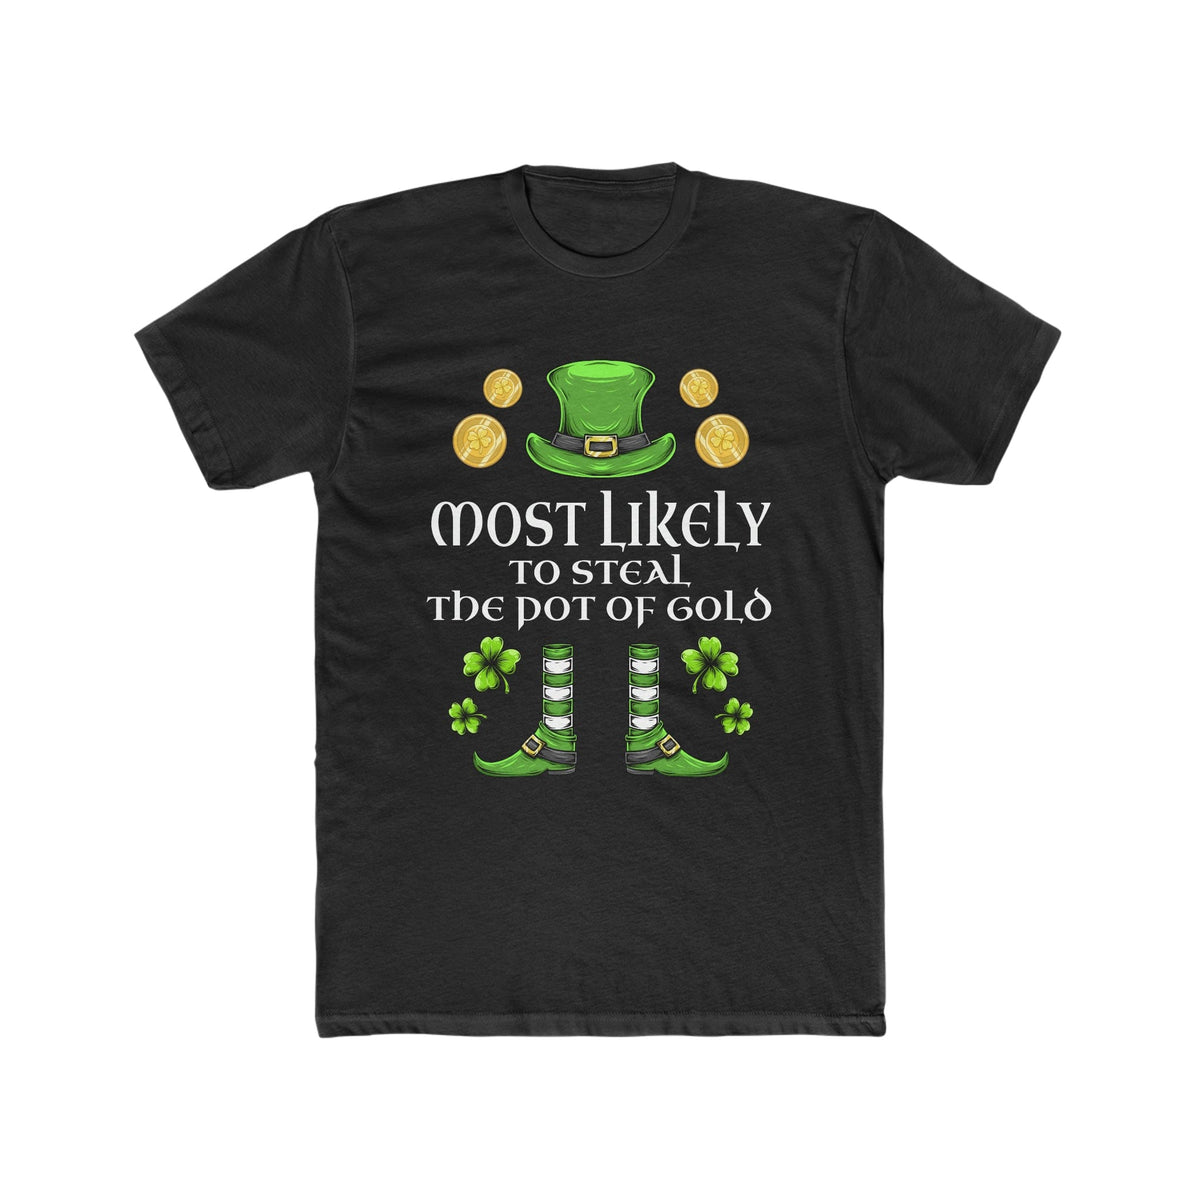 Most likely TO STEAL THE POT OF GOLD Premium Unisex Shirt